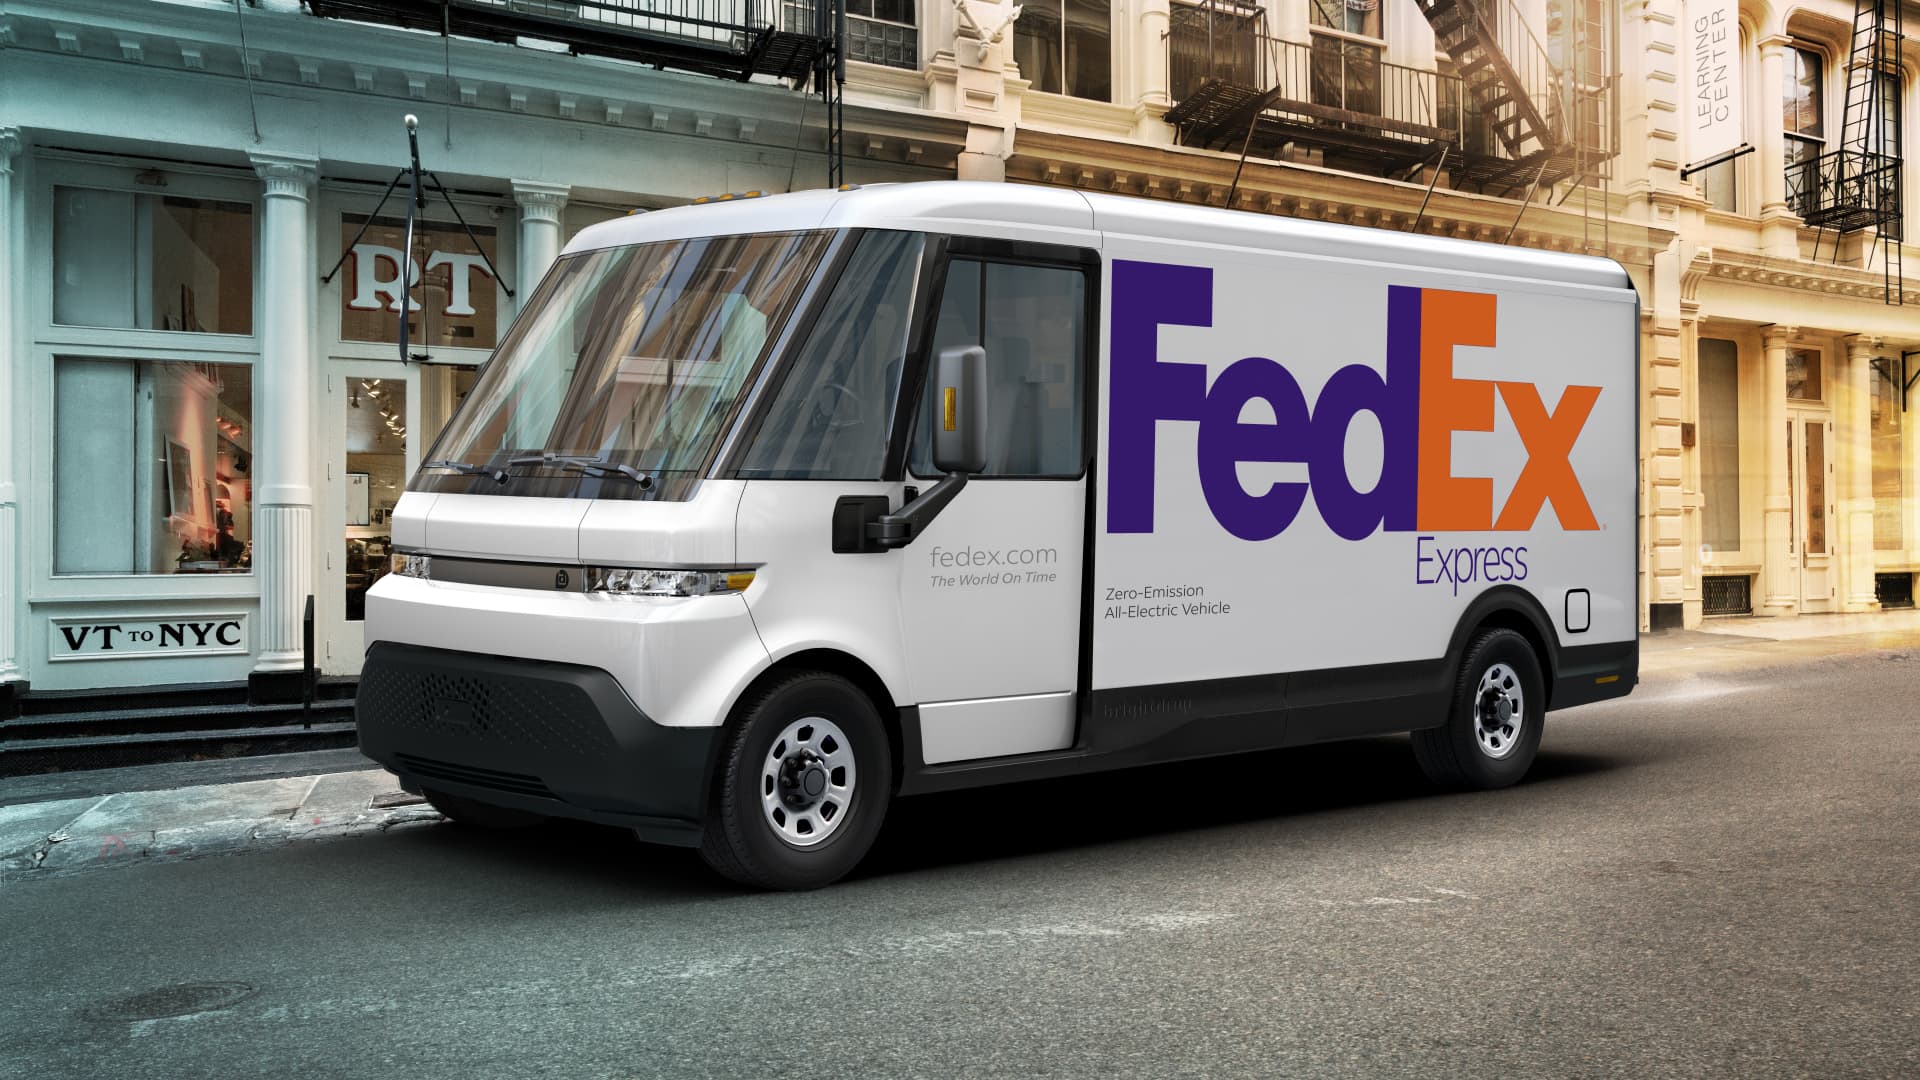 General Motors plans to launch a new all-electric van called the EV600 by the end of this year. The first 500 vehicles will be sold to FedEx.